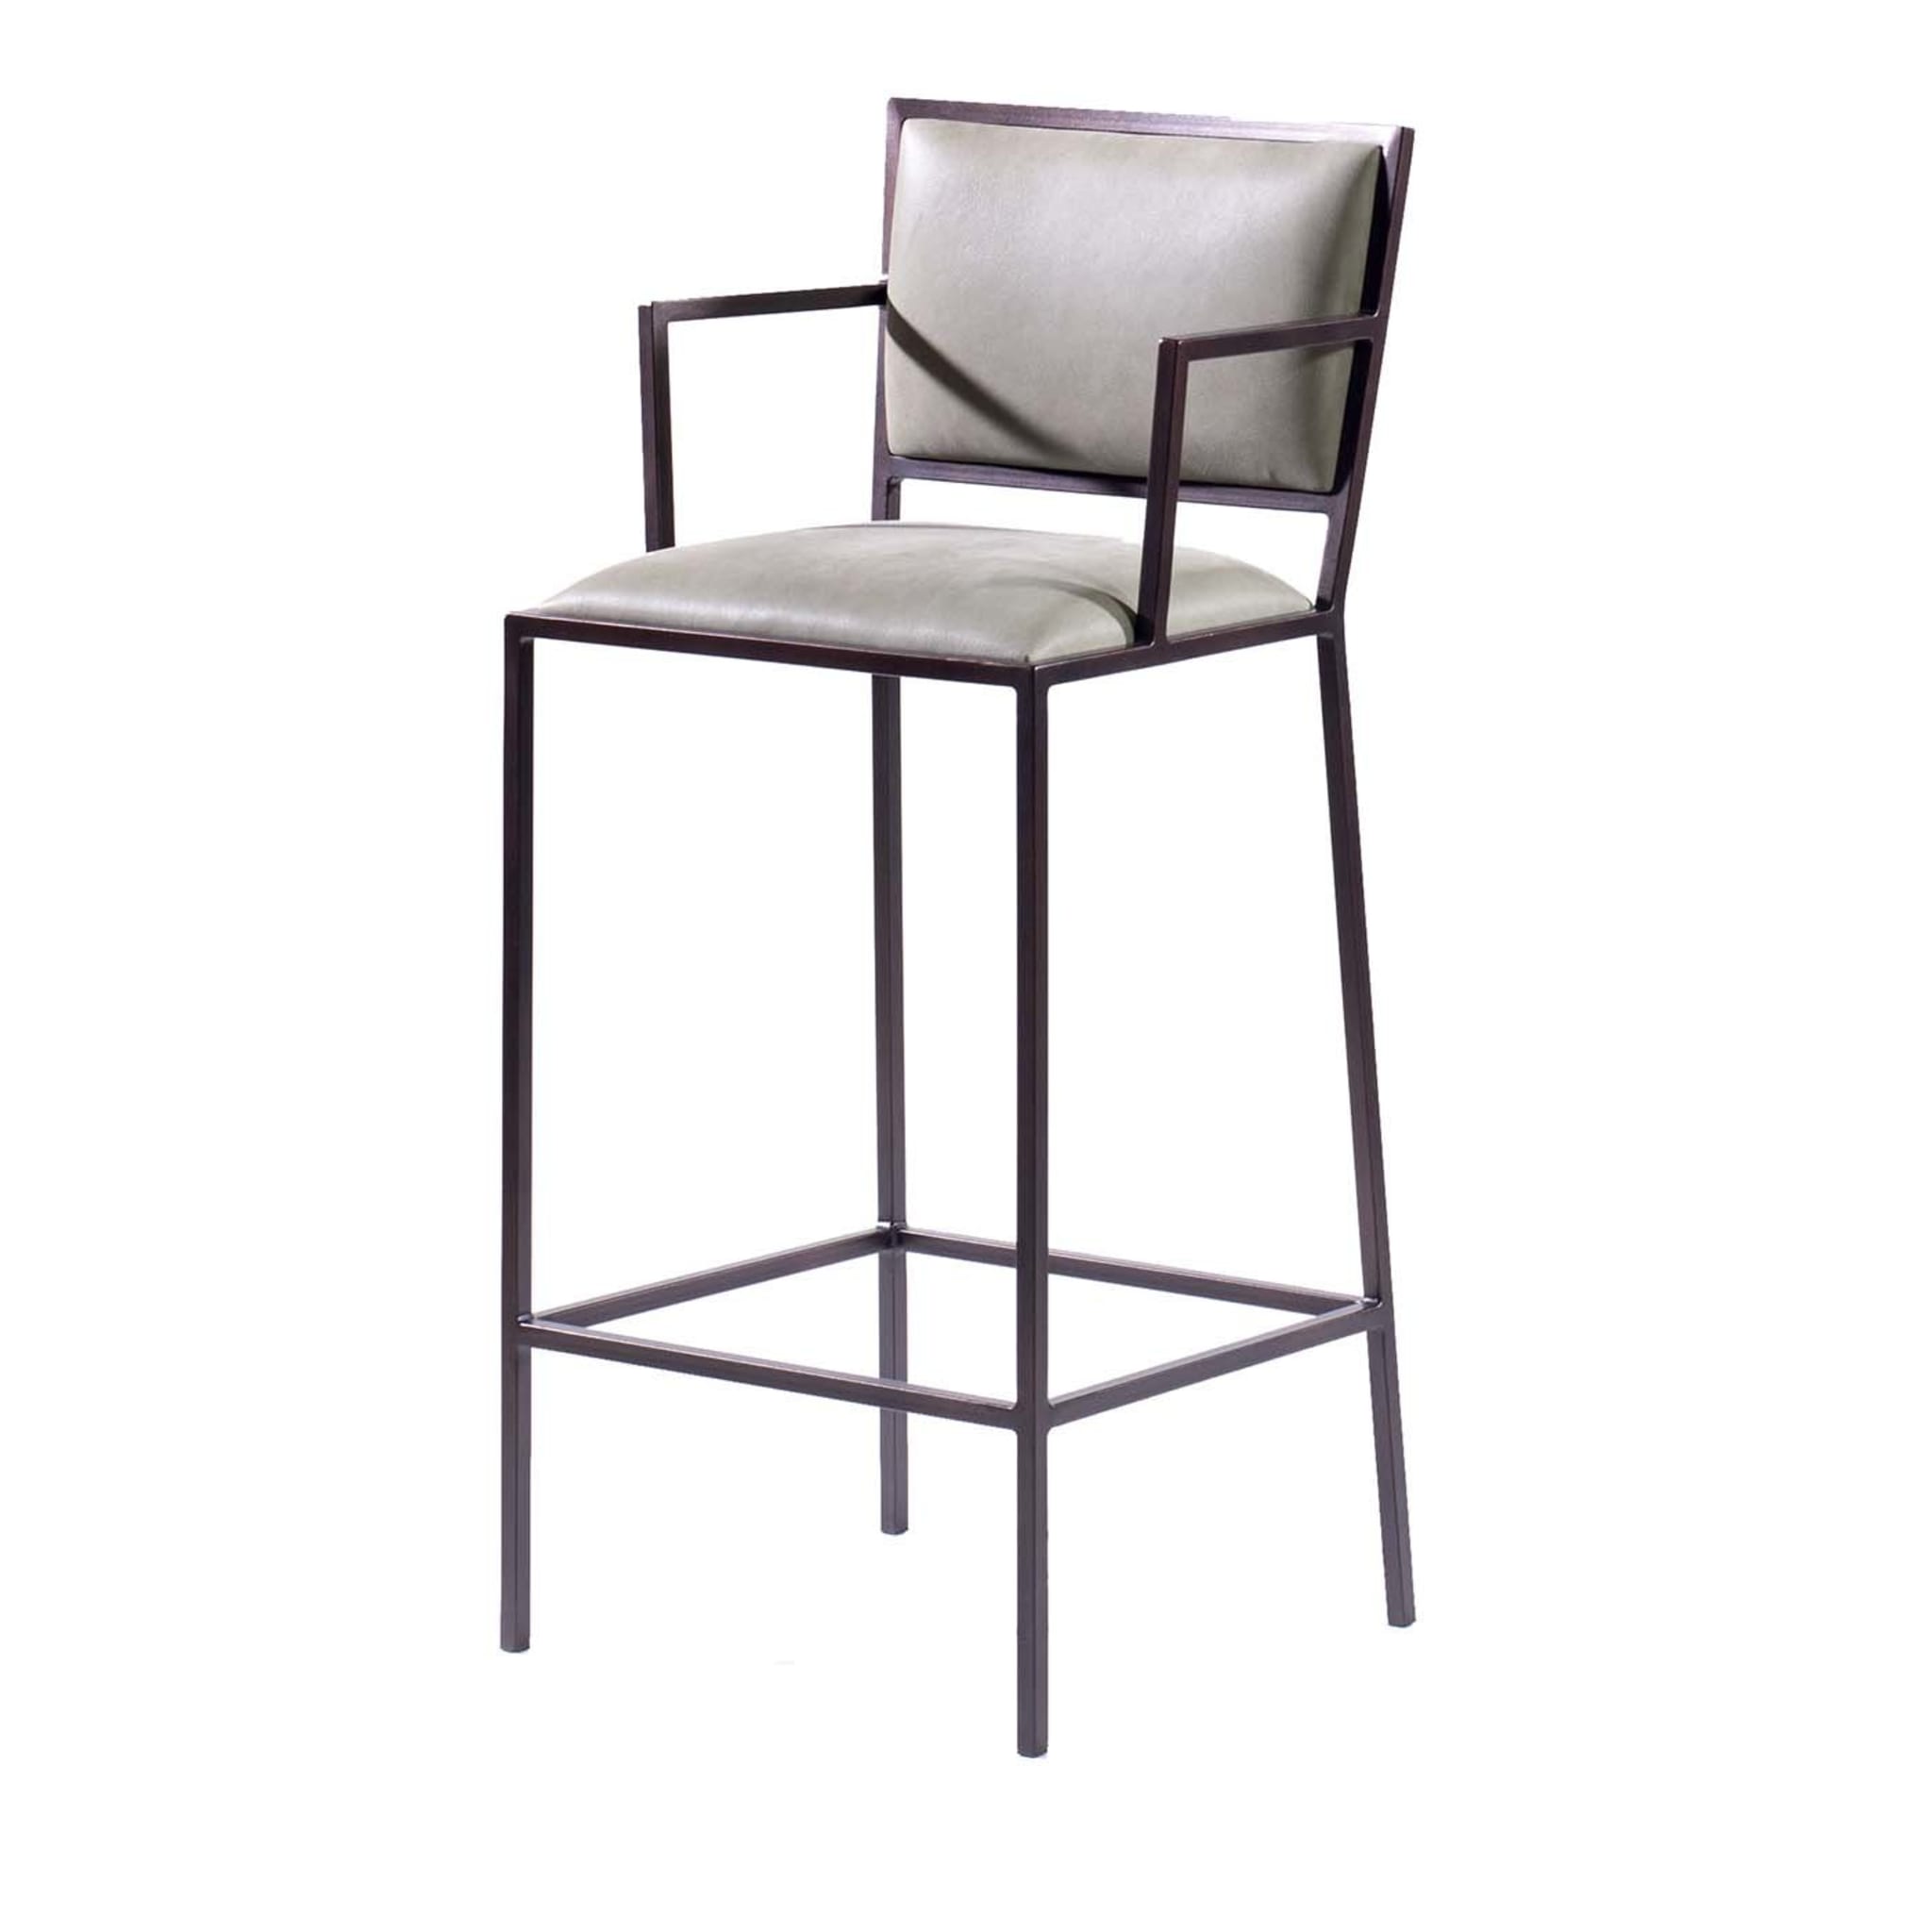 The Simple Bar Stool - Main view